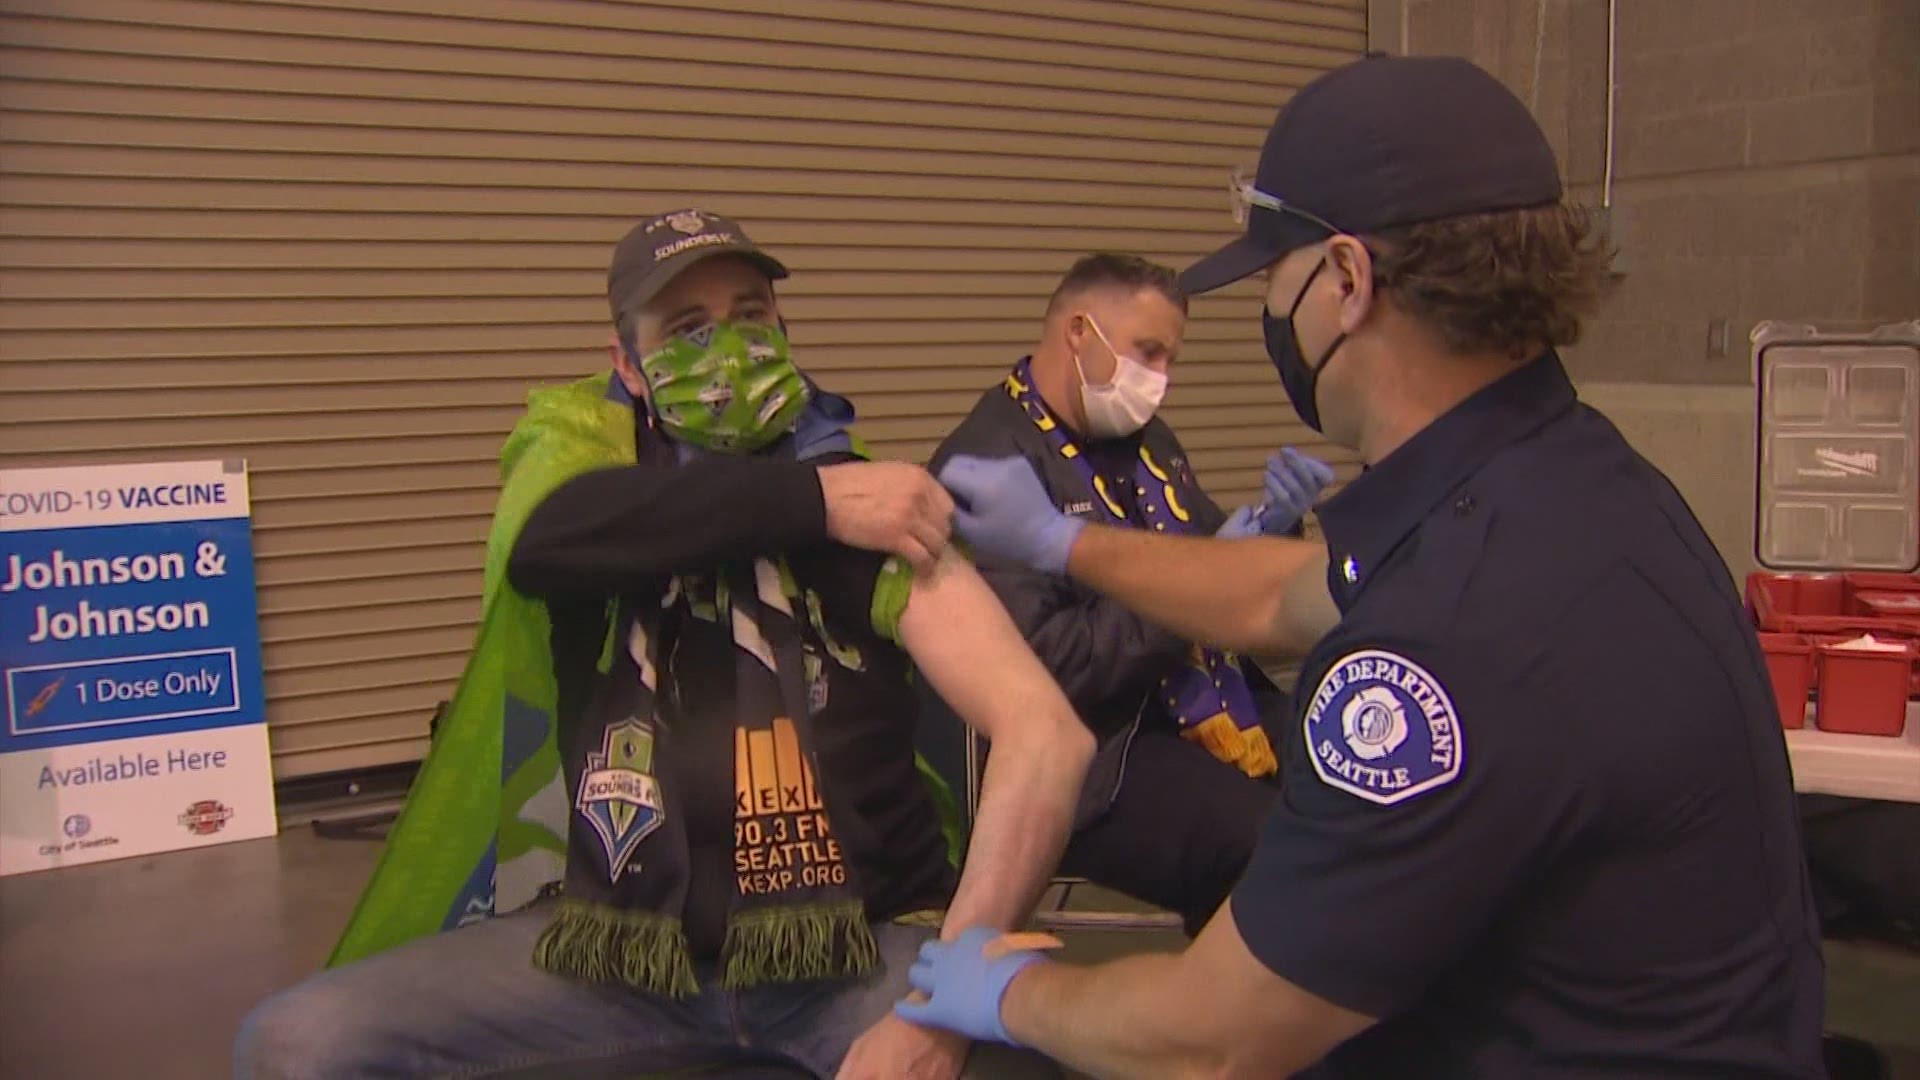 Sounders FC, Virginia Mason, the City of Seattle, and Lumen Field and First & Goal Inc. are offering vaccinations to eligible fans.